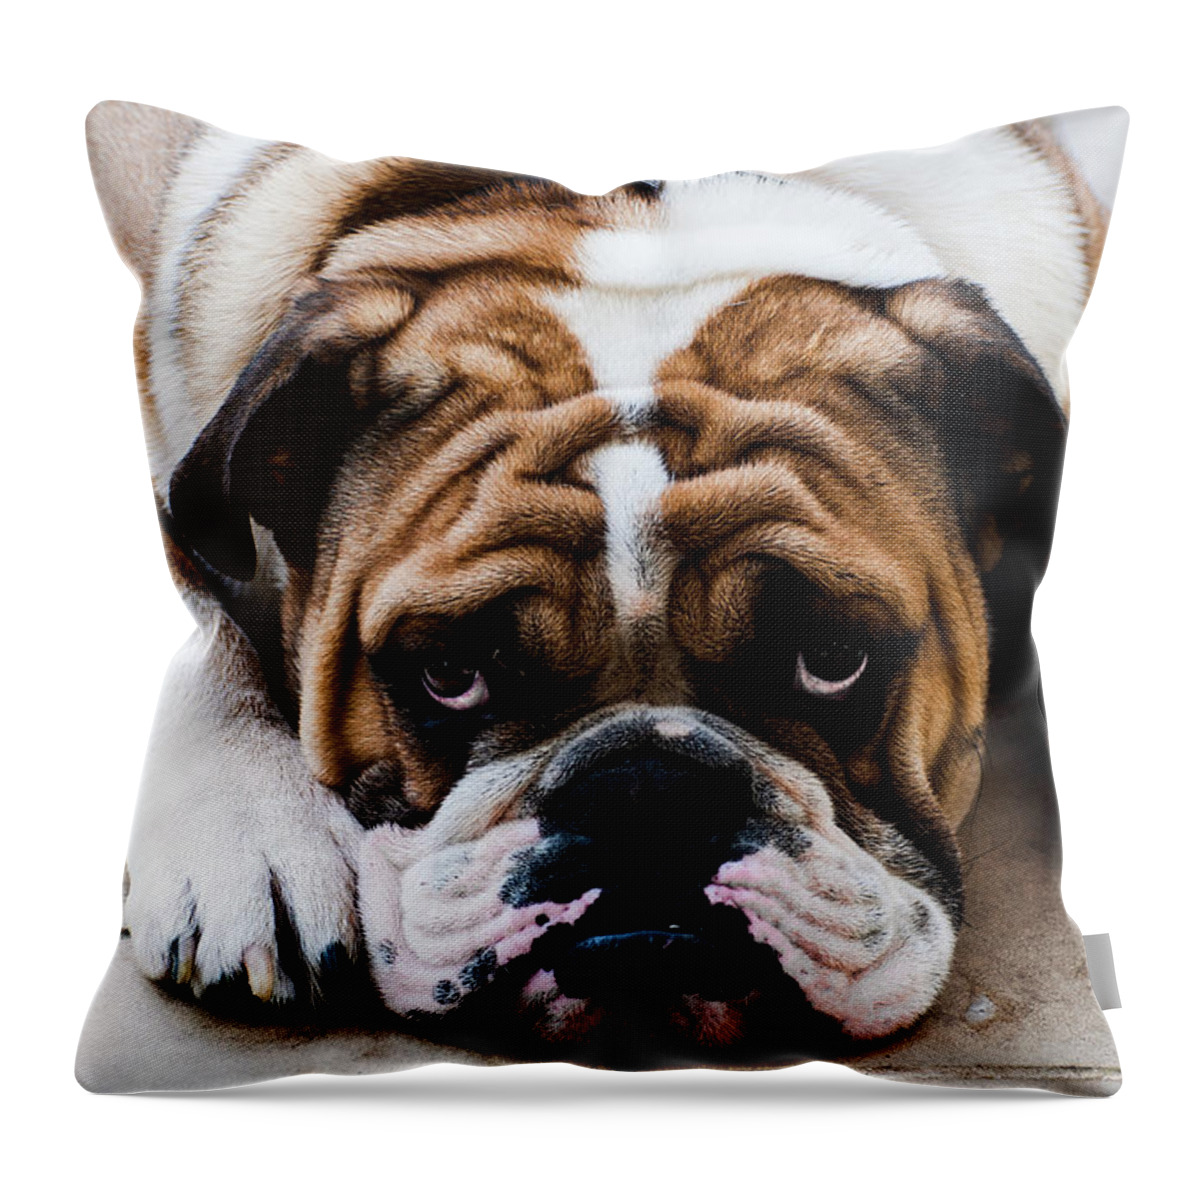 Pets Throw Pillow featuring the photograph The English Bulldog by Romeo Banias